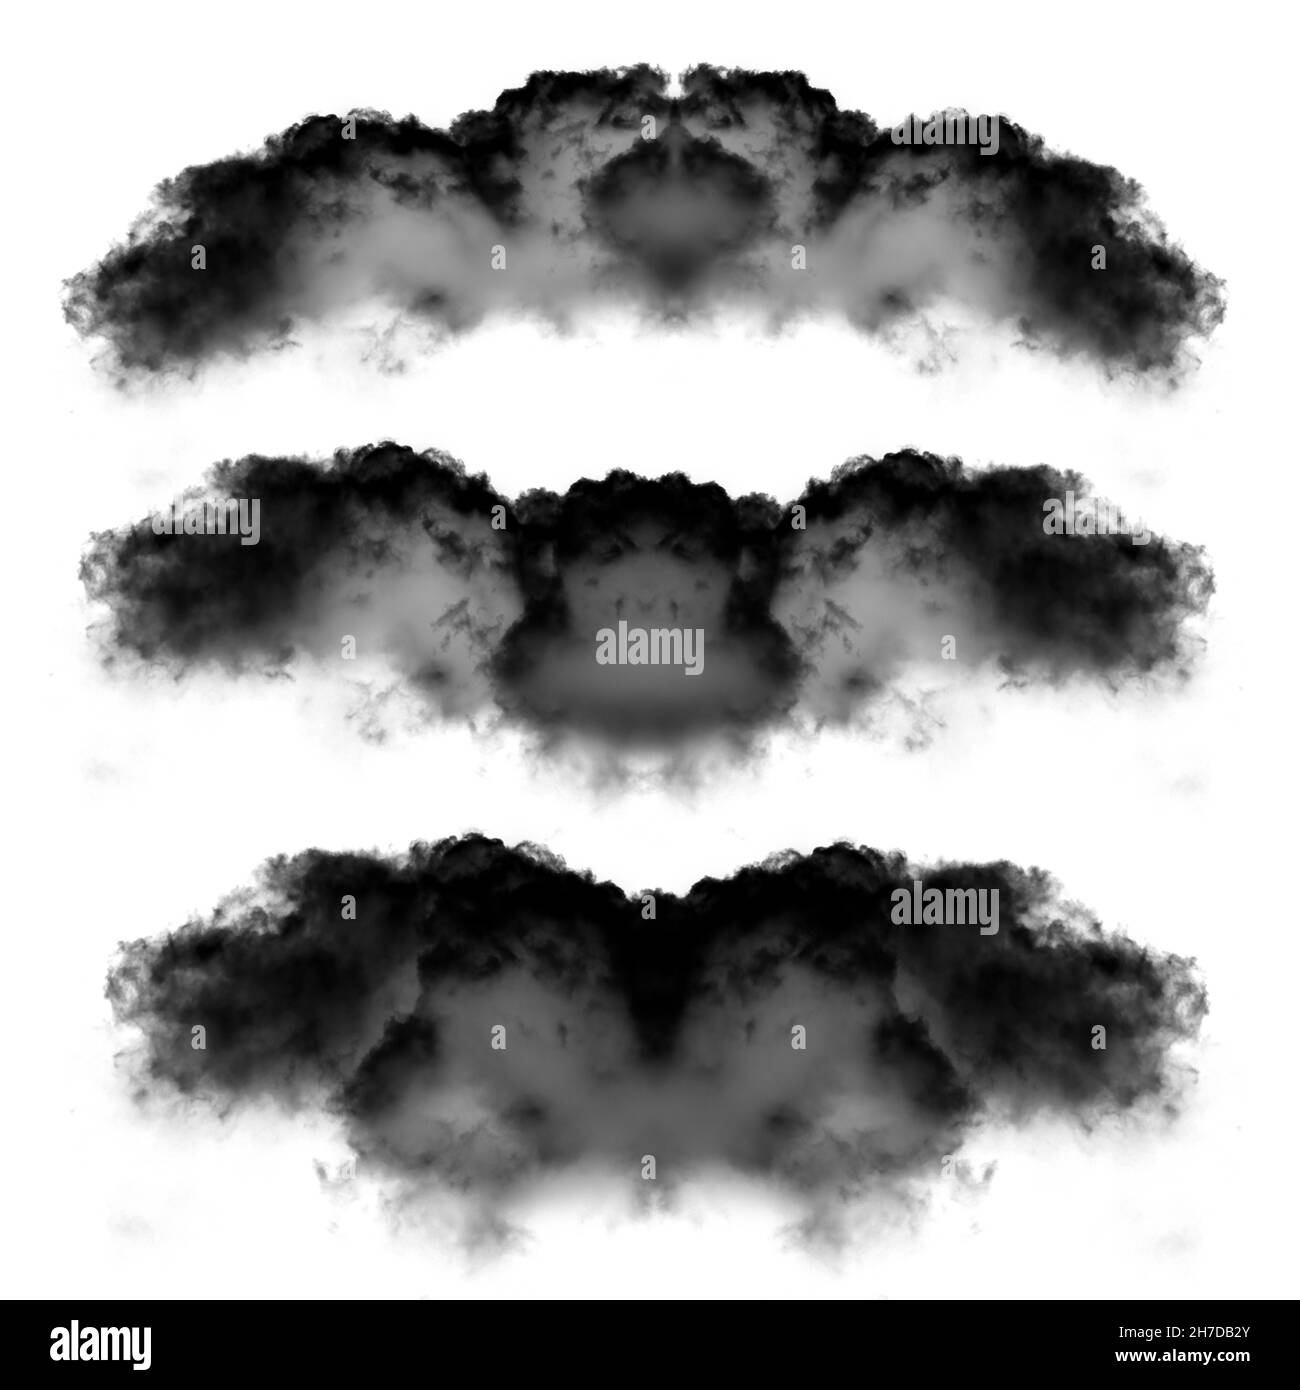 Symmetrical clouds shaped isolated over black background, illustration, drawing, 3D computer generated fluffy cloud shape Stock Photo